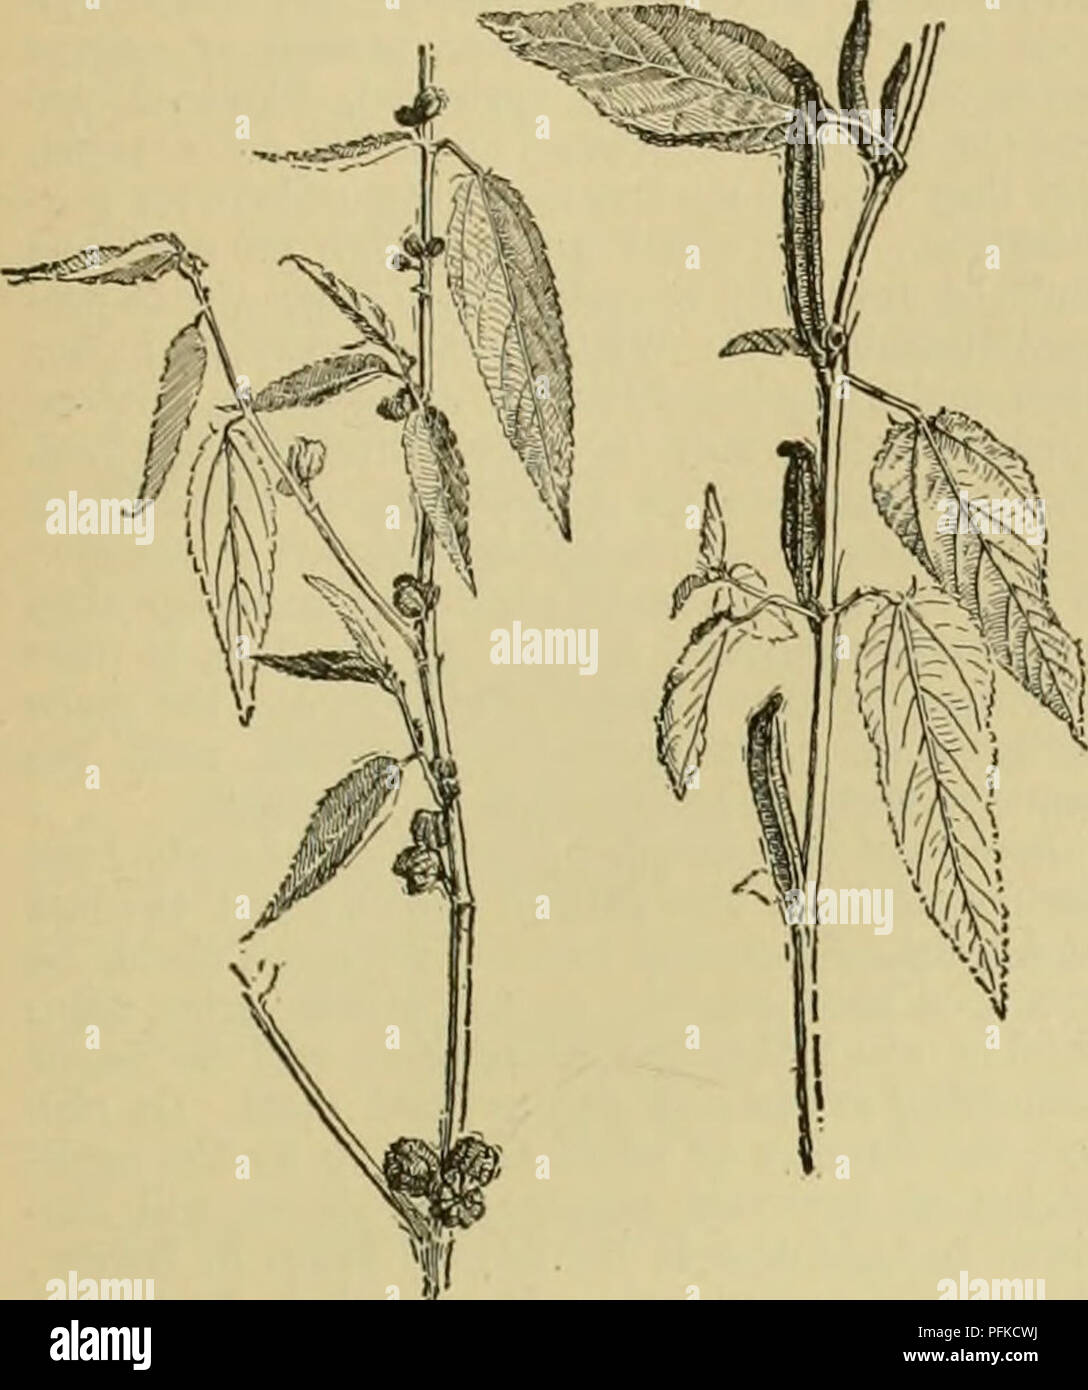 . Cyclopedia of farm crops. Farm produce; Agriculture. FIBER PLANTS FIBER PLANTS 283 the top. The basal lobes of the leaves of both spe- cies terminate in slender points. The seed-pods of C. capsularis are nearly spherical, while those of C. olitorius are prismatic or nearly cylindrical.. Fig. 393. Jute, left (Oorchorus capsularis); right, Nalta ixJi [Corchorus olitorius). Branches with seed-pods. The best fiber is produced by C. capsularis, and this species is more extensively cultivated. The cultivation of C. olitorius is confined largely to the warmer and wetter regions near the coast. Se Stock Photo